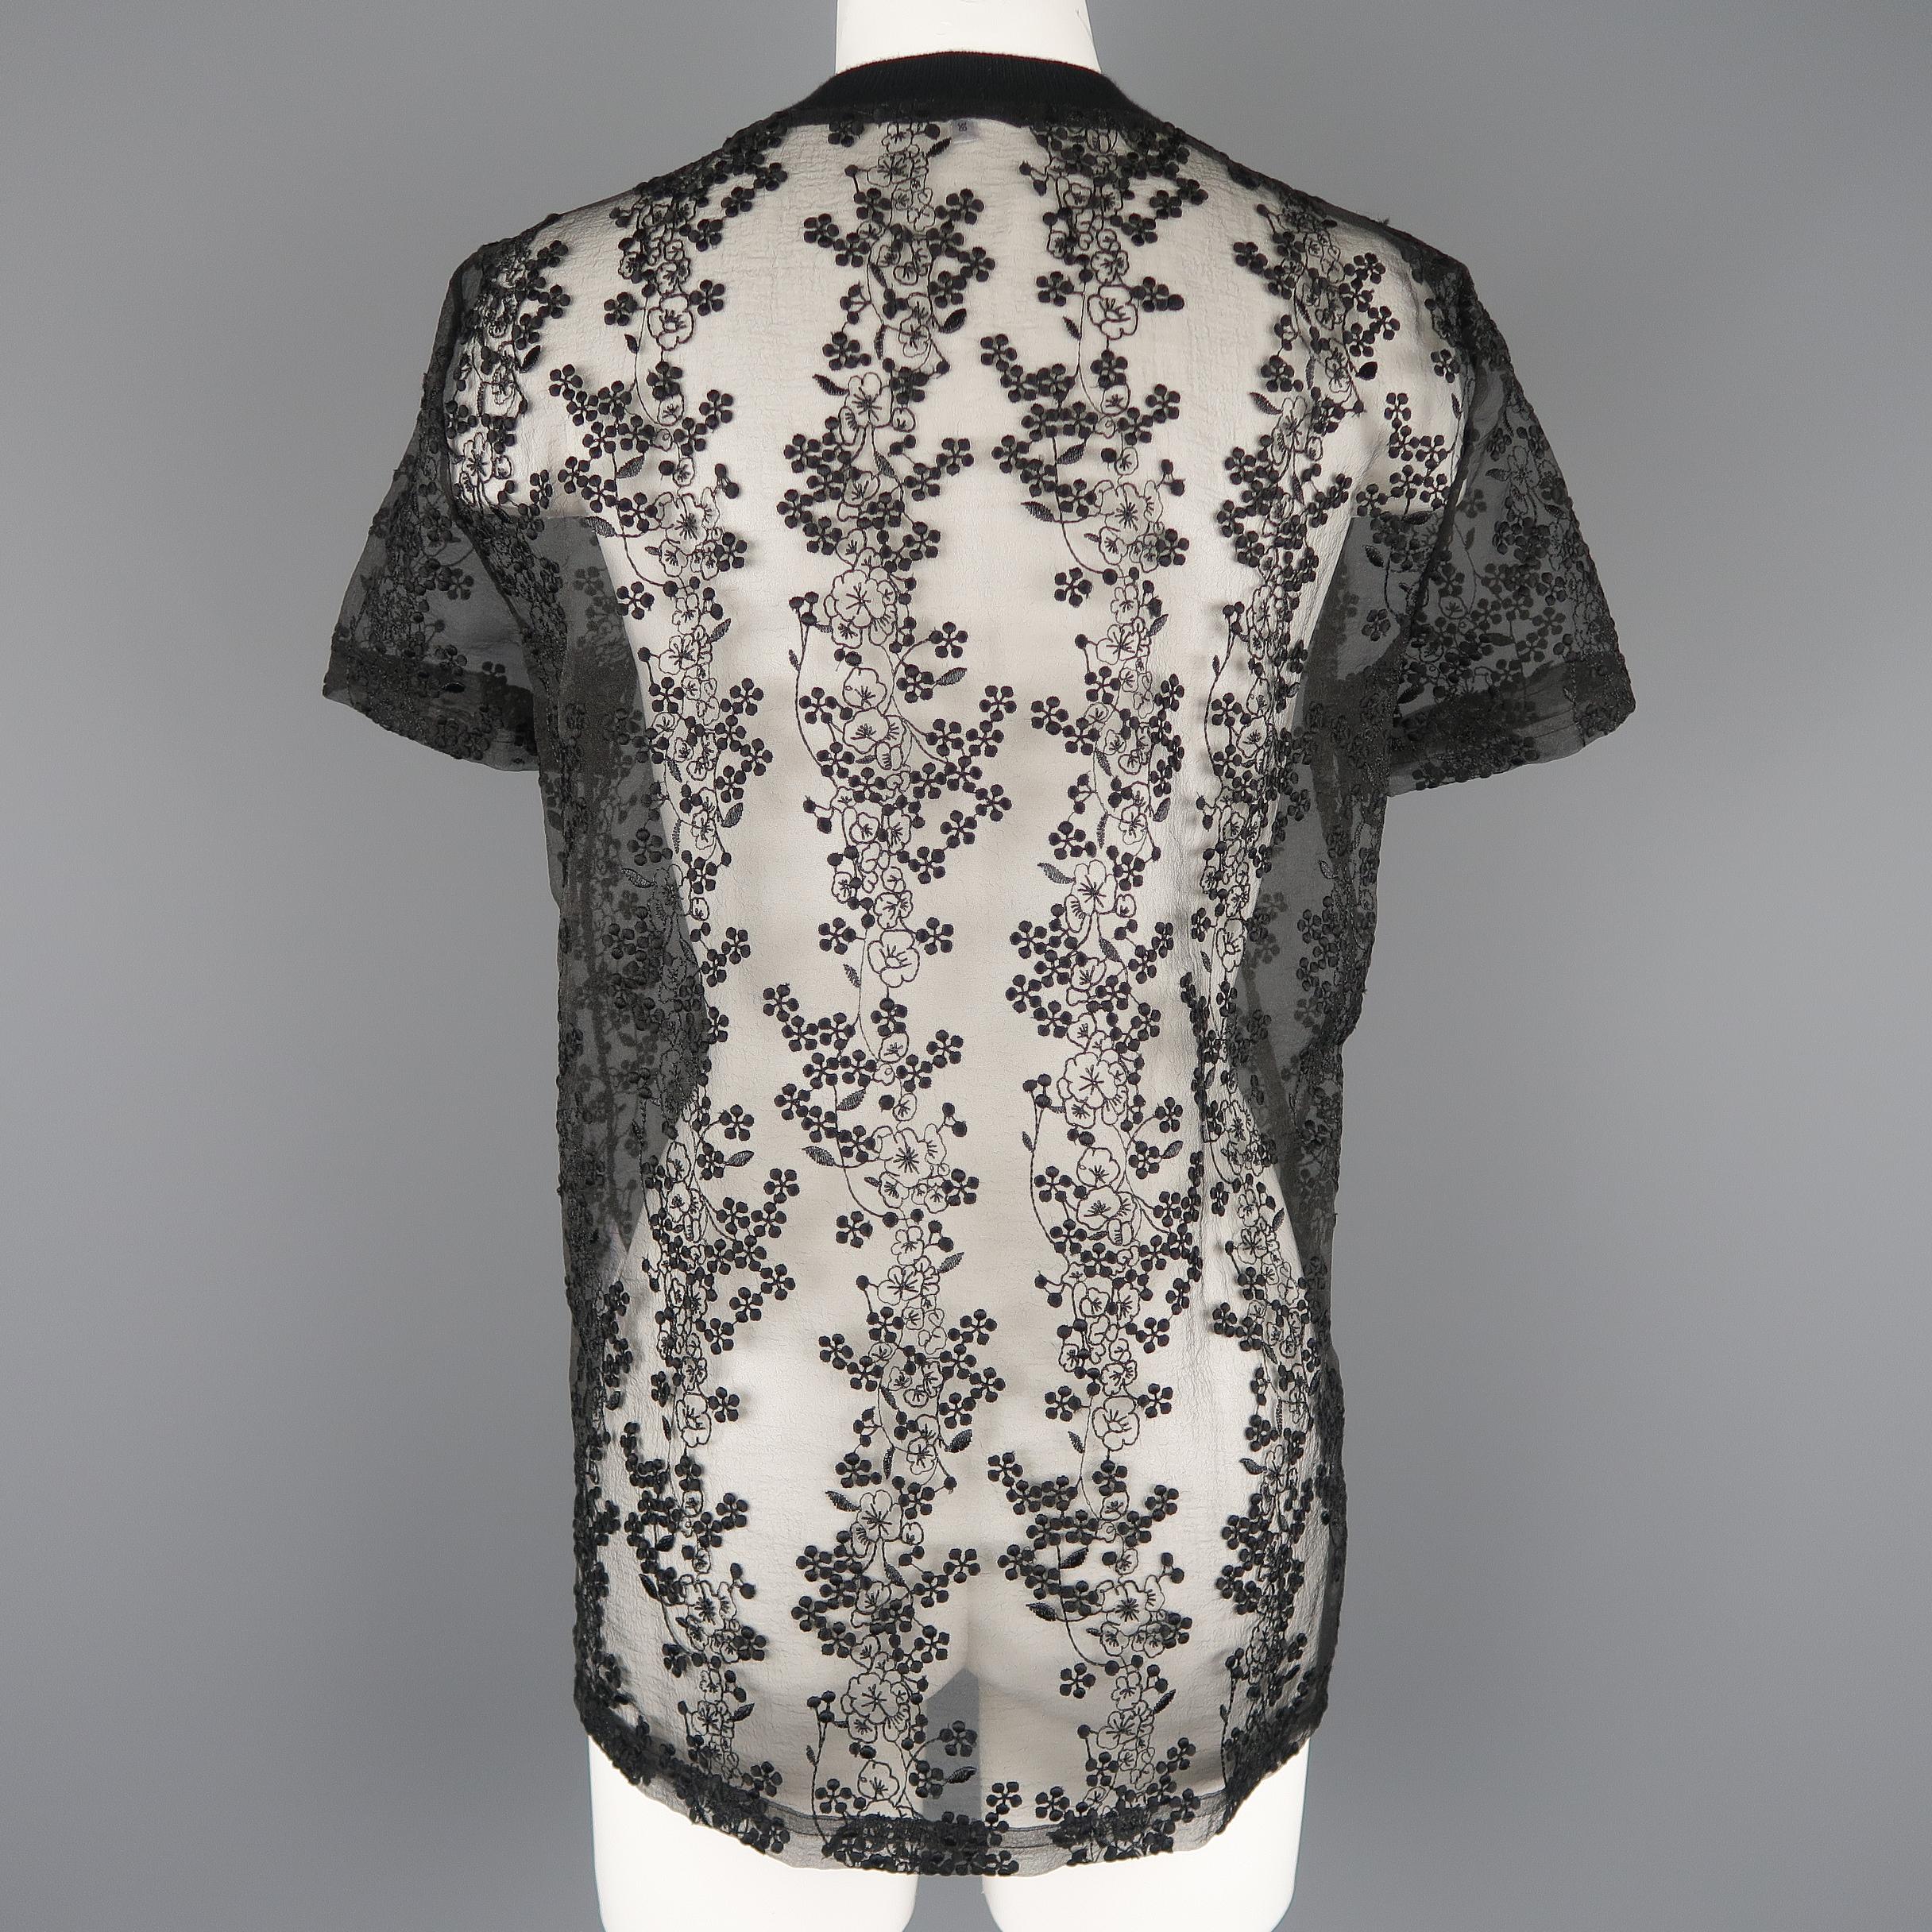 Women's CARVEN Size 2 Black Floral Lace Embroidered Organza T-Shirt Tee Blouse